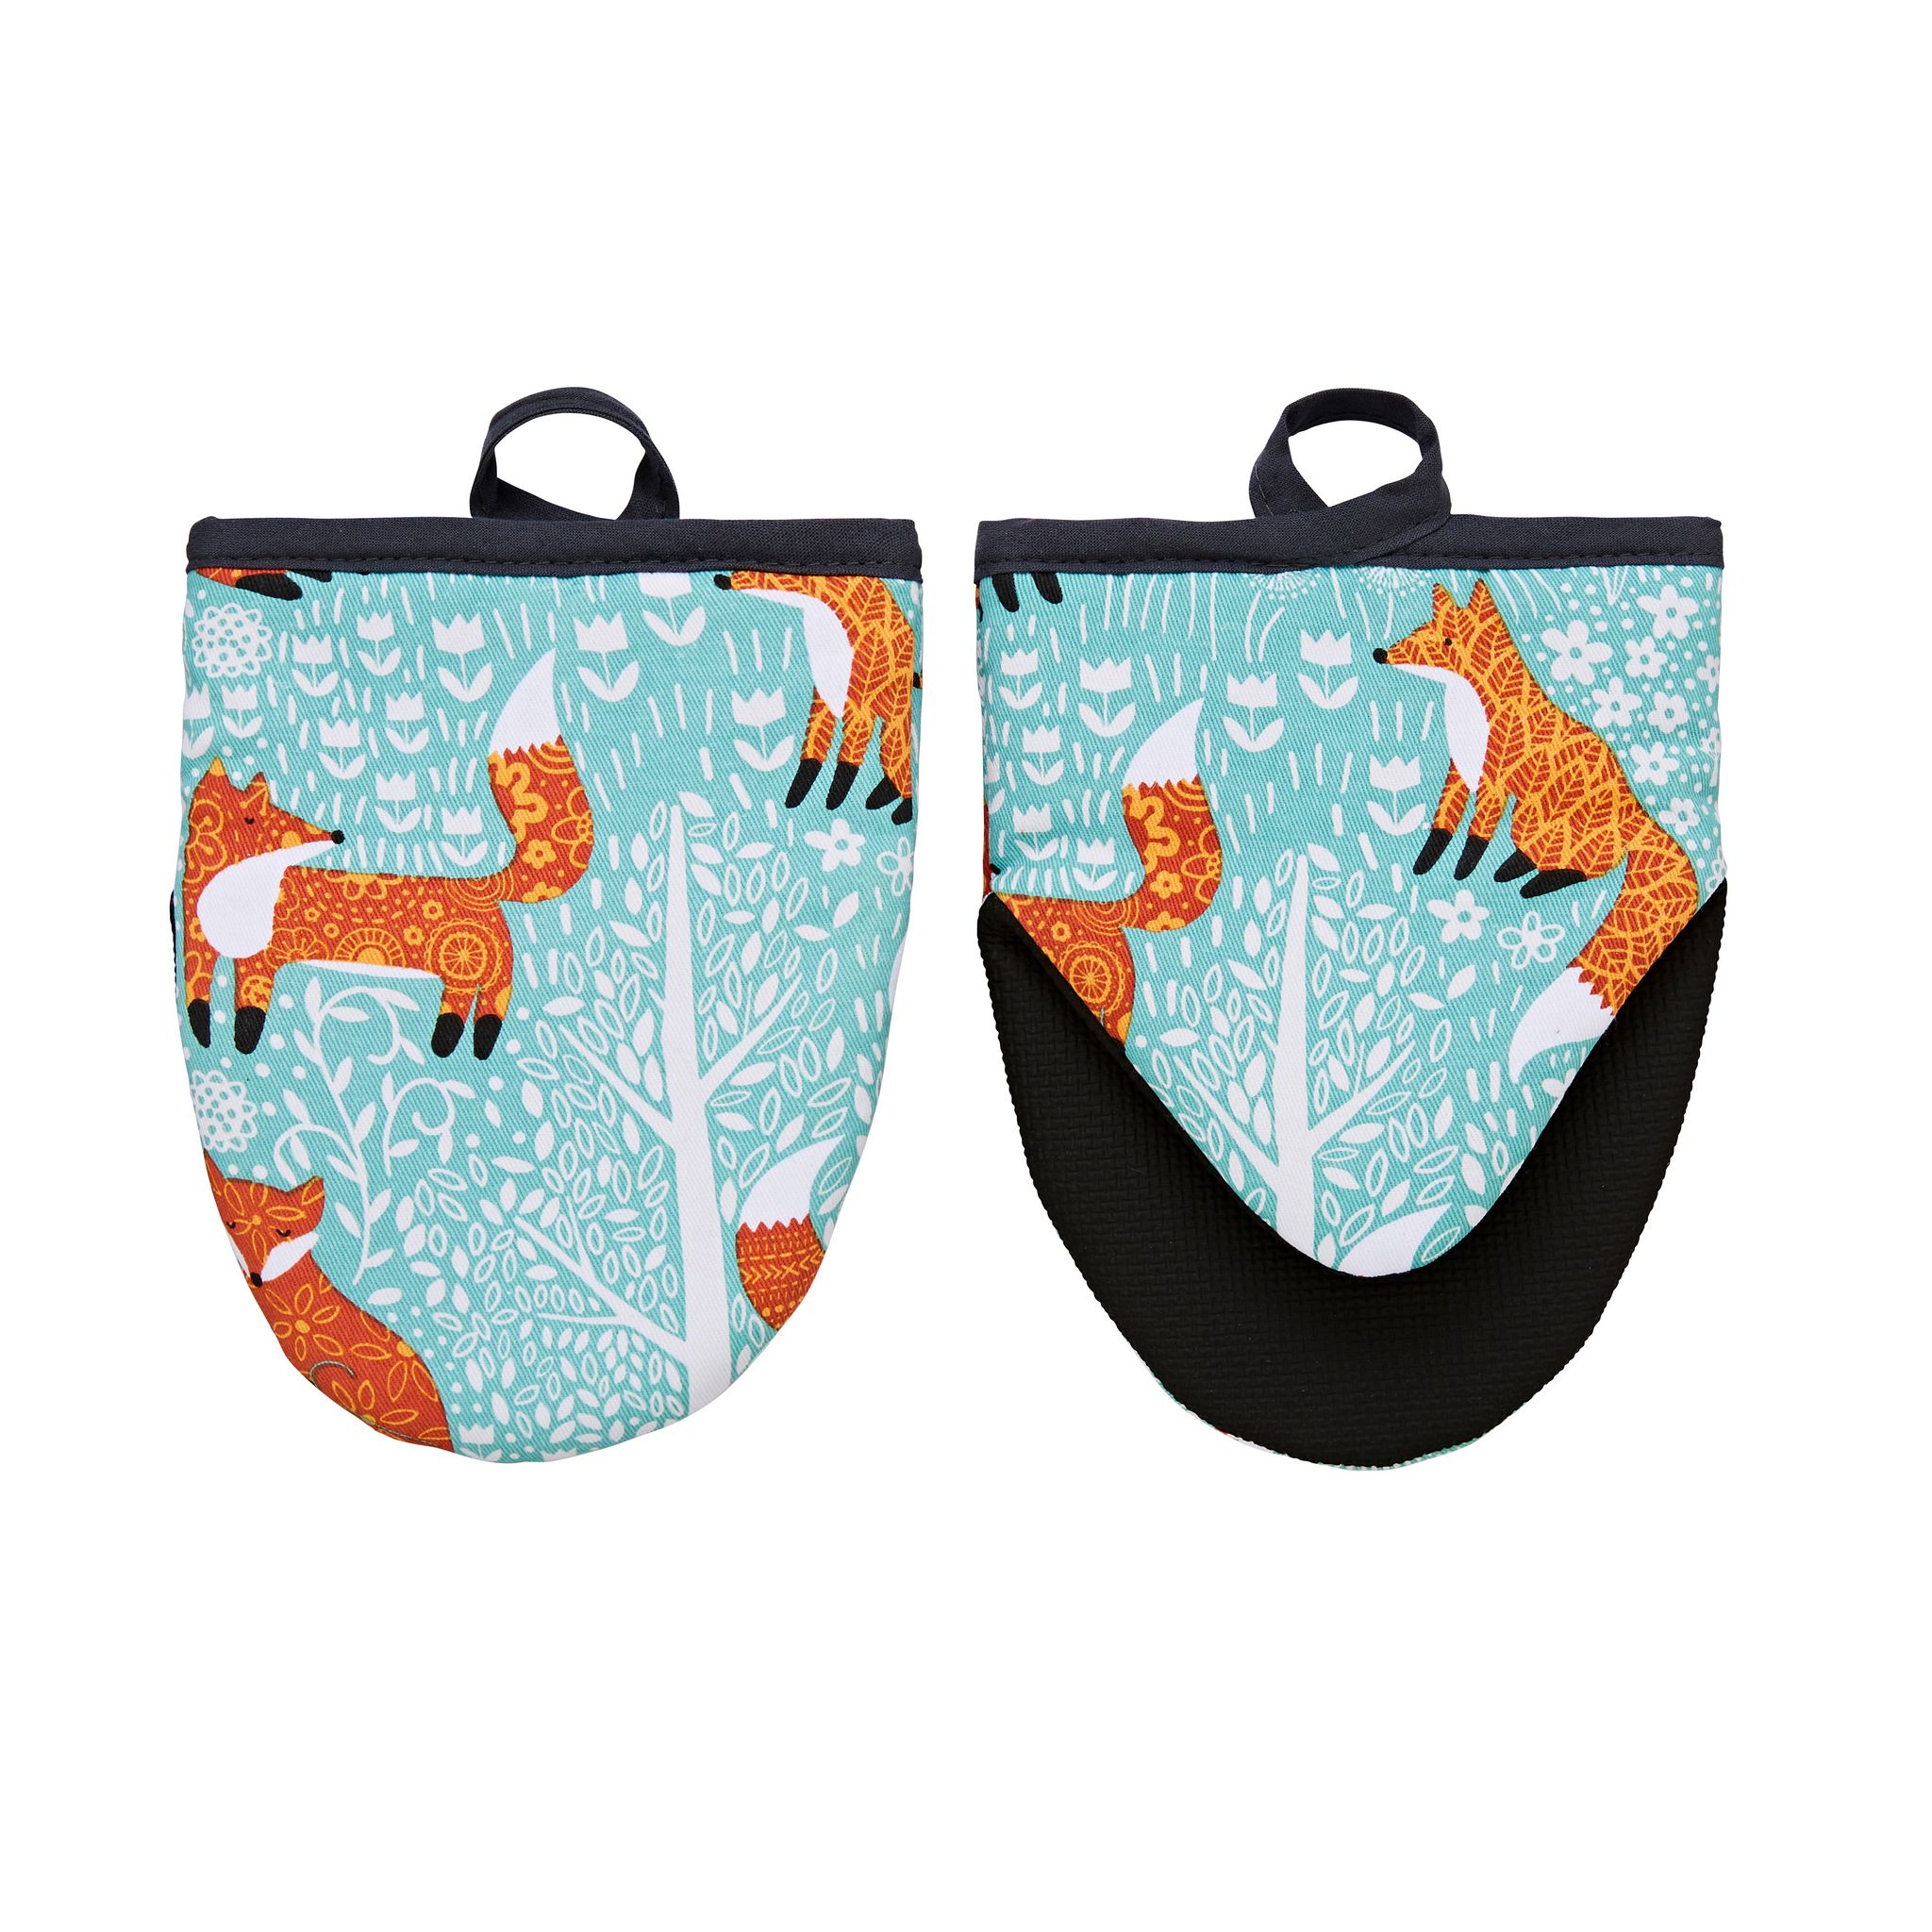 Ulster Weavers Micro Mitts - Foraging Fox (100% Cotton Outer with Neoprene Sleeve, Blue) - Micro Mitts - Ulster Weavers